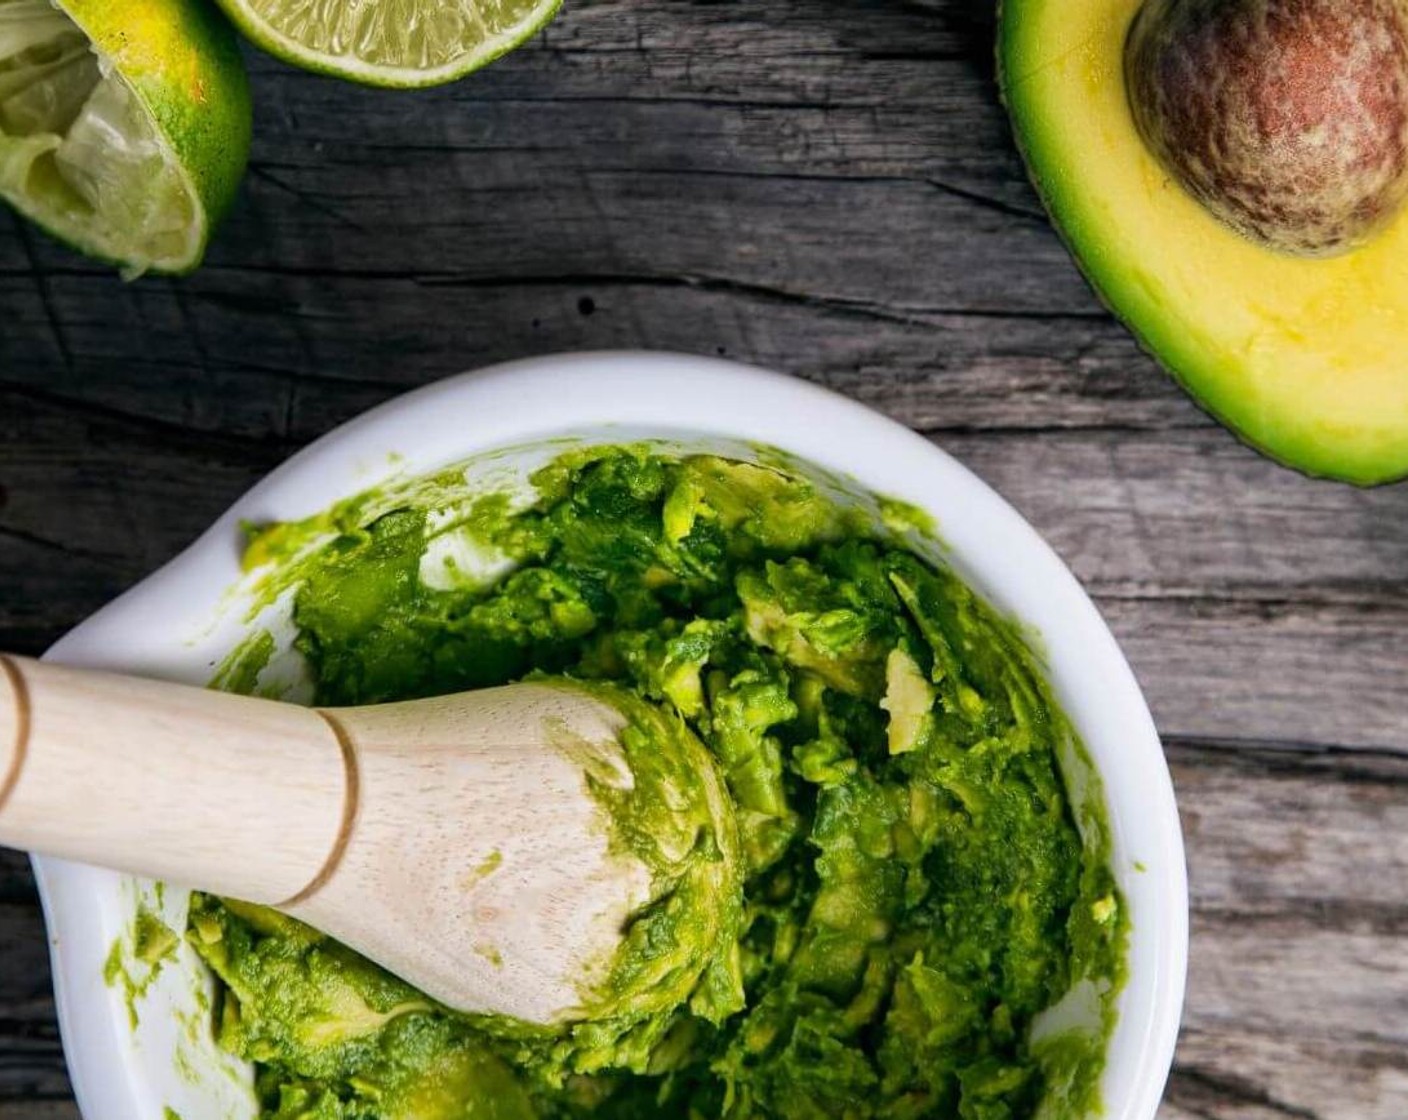 step 5 Taste, then add Salt (to taste) and Ground Black Pepper (to taste) if desired. To store any leftovers, place a piece of plastic wrap directly on the guacamole then cover with a tightly fitting lid.